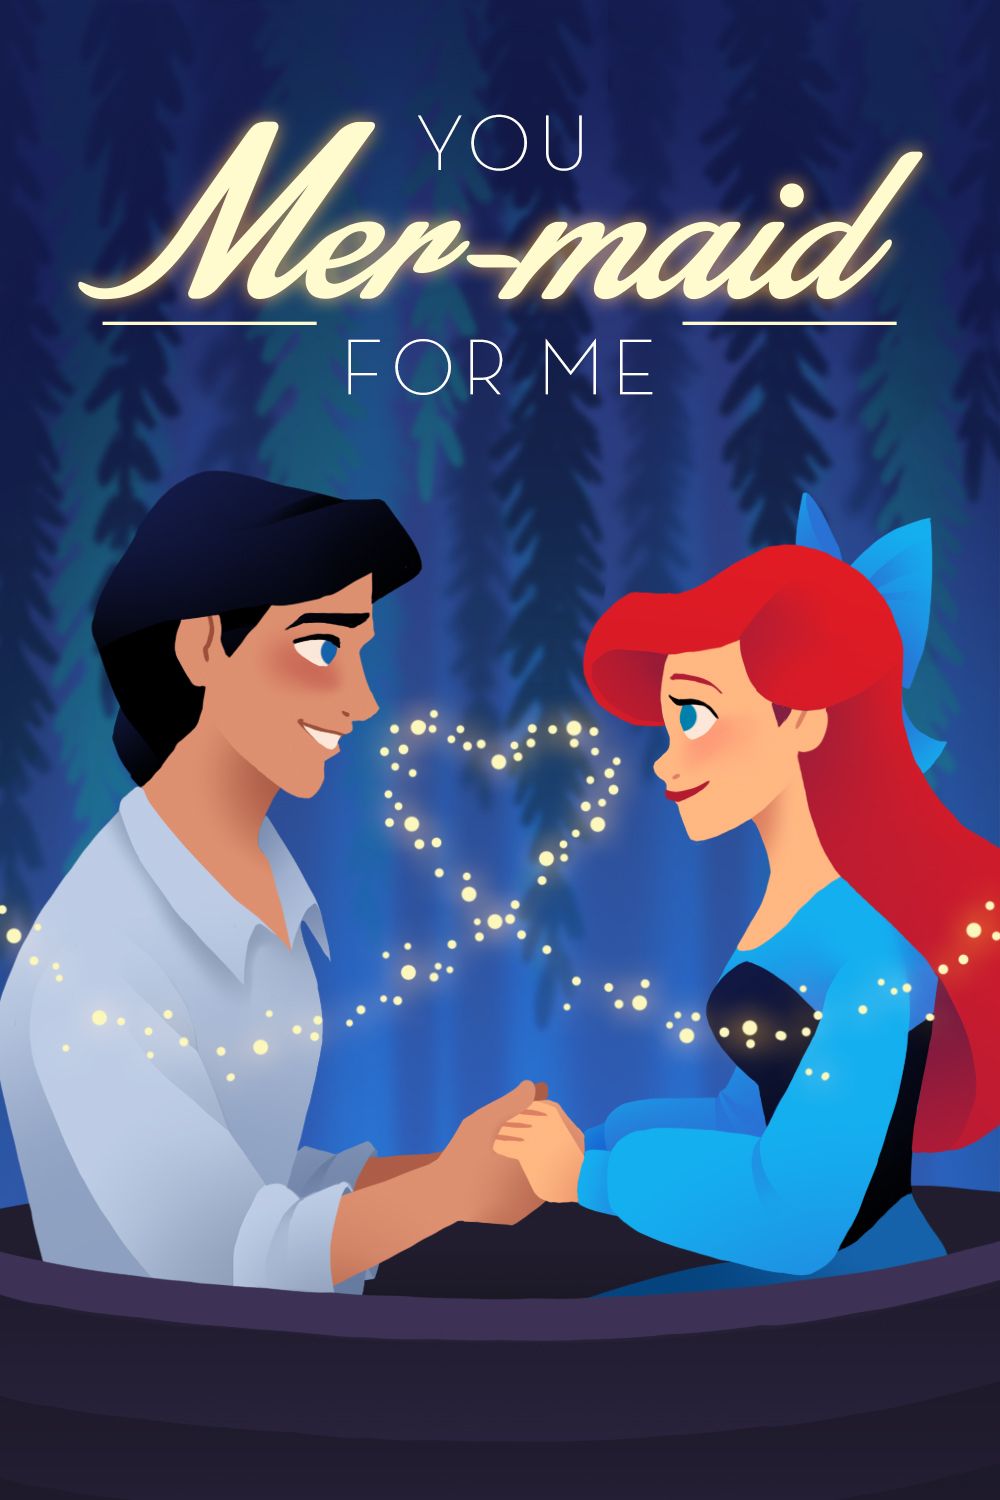 Adorable Disney Valentine's Day Cards. Oh My Disney. Disney valentines, Disney fun, Disney lover